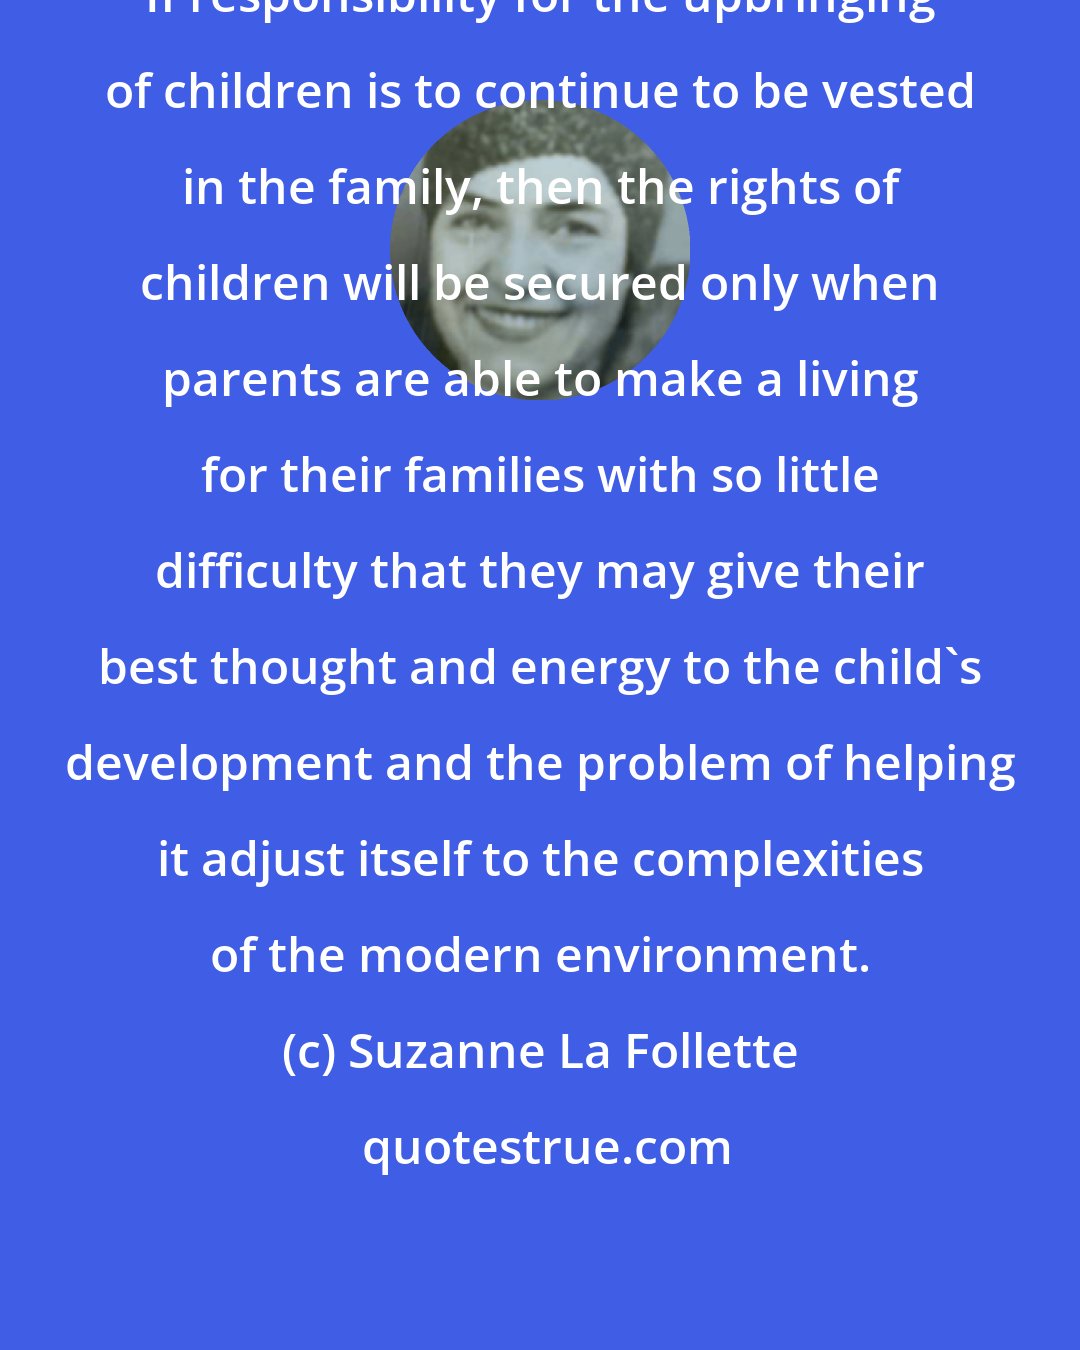 Suzanne La Follette: If responsibility for the upbringing of children is to continue to be vested in the family, then the rights of children will be secured only when parents are able to make a living for their families with so little difficulty that they may give their best thought and energy to the child's development and the problem of helping it adjust itself to the complexities of the modern environment.